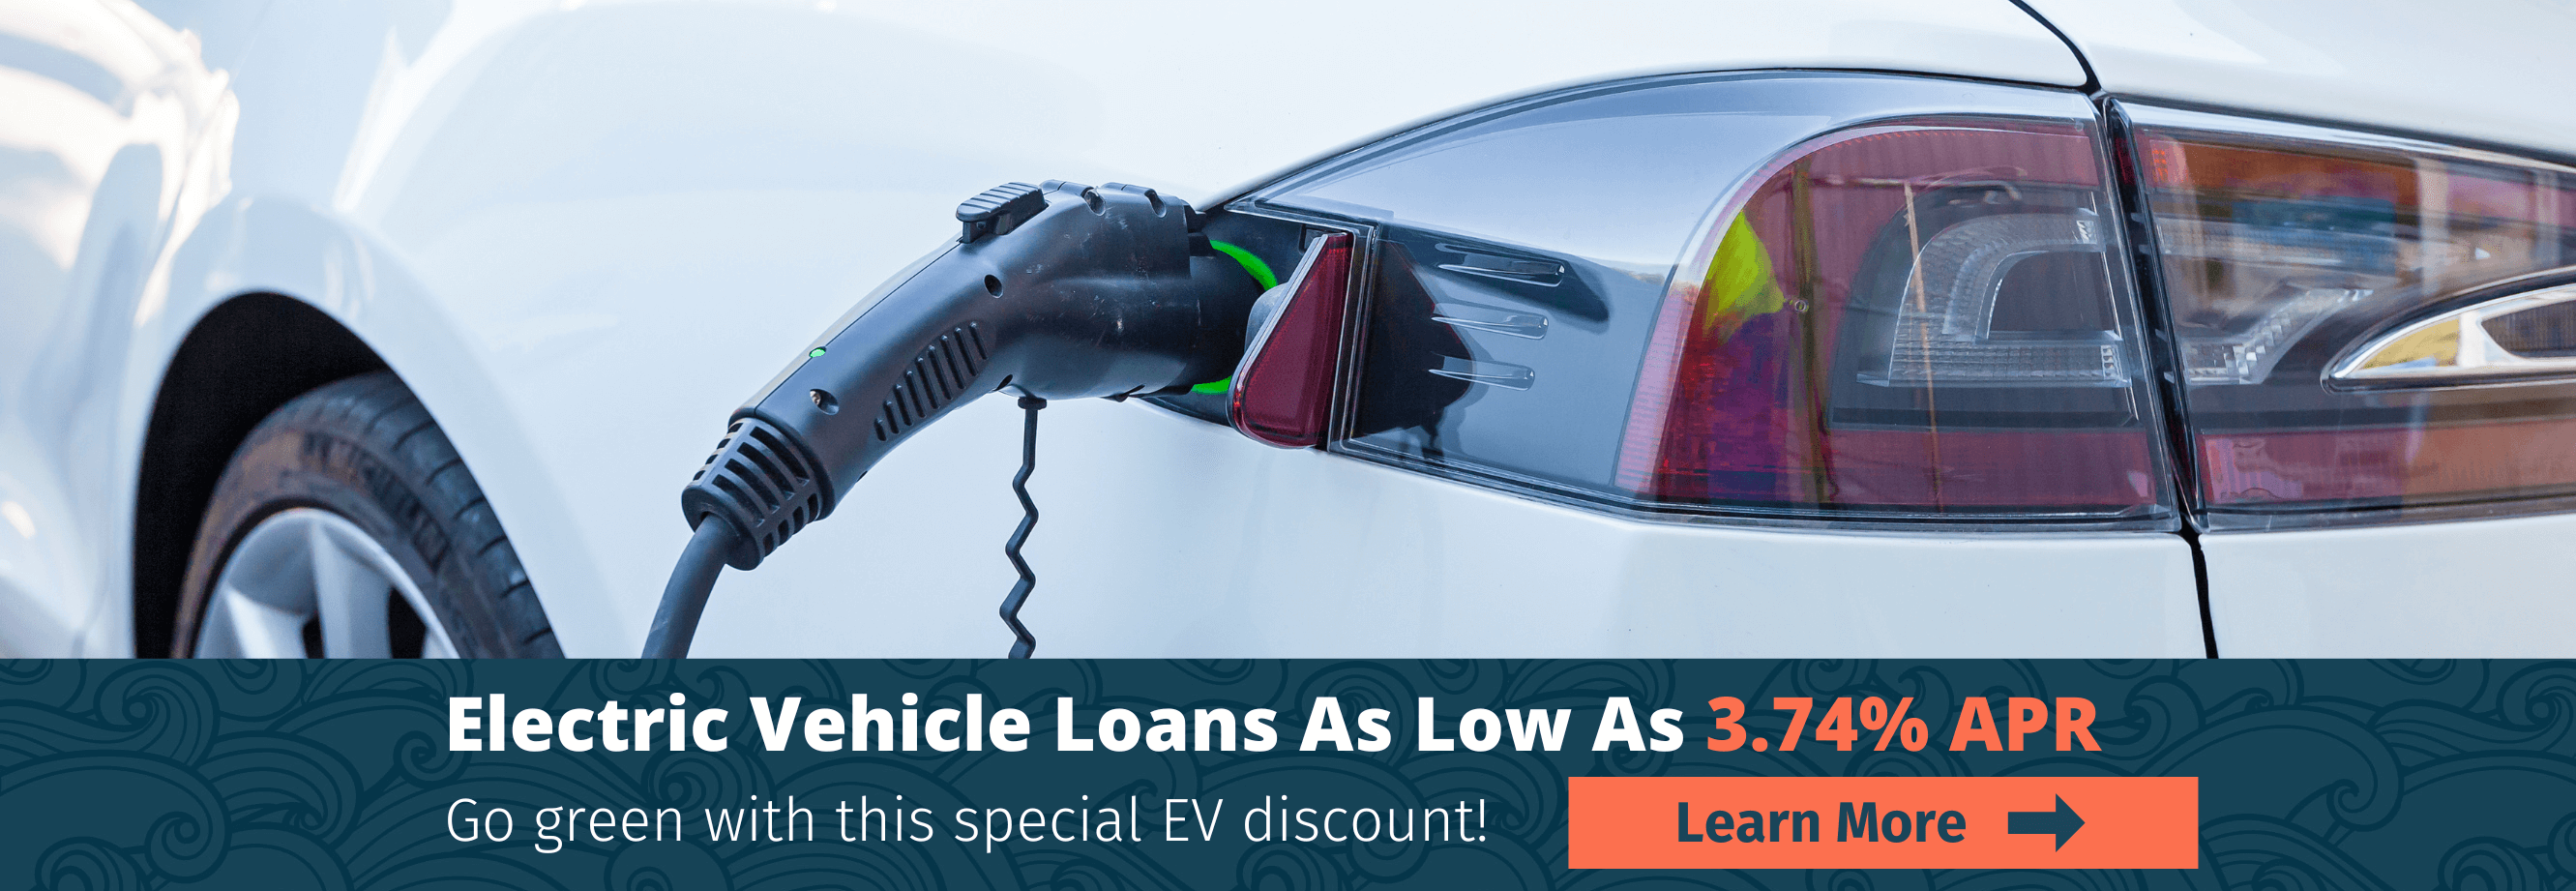 Electric Vehicle Loans